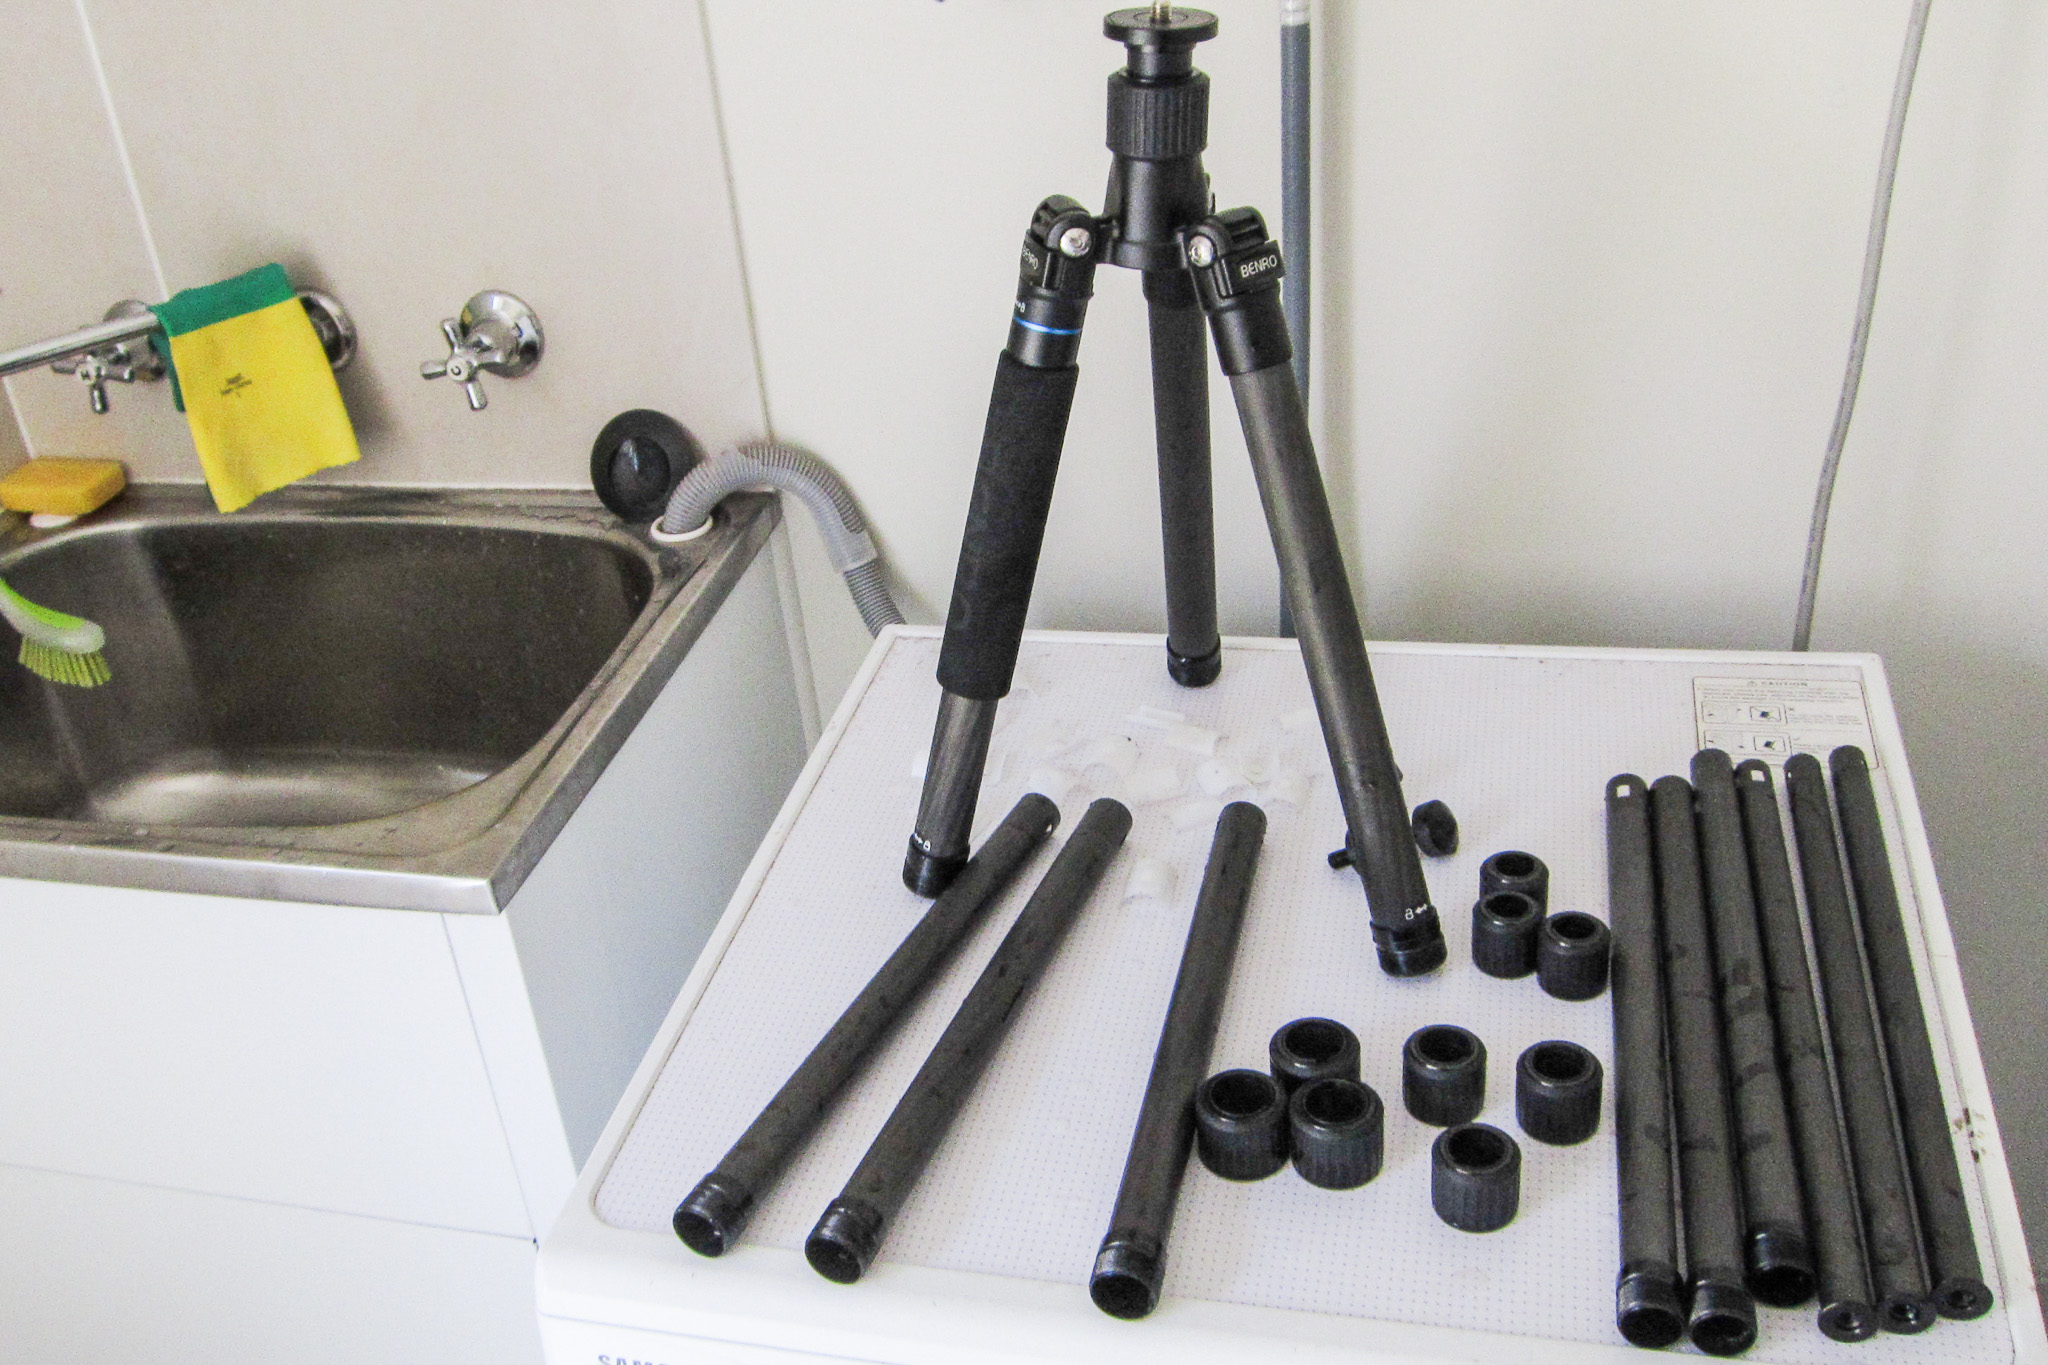 How to Clean your Benro Tripod?